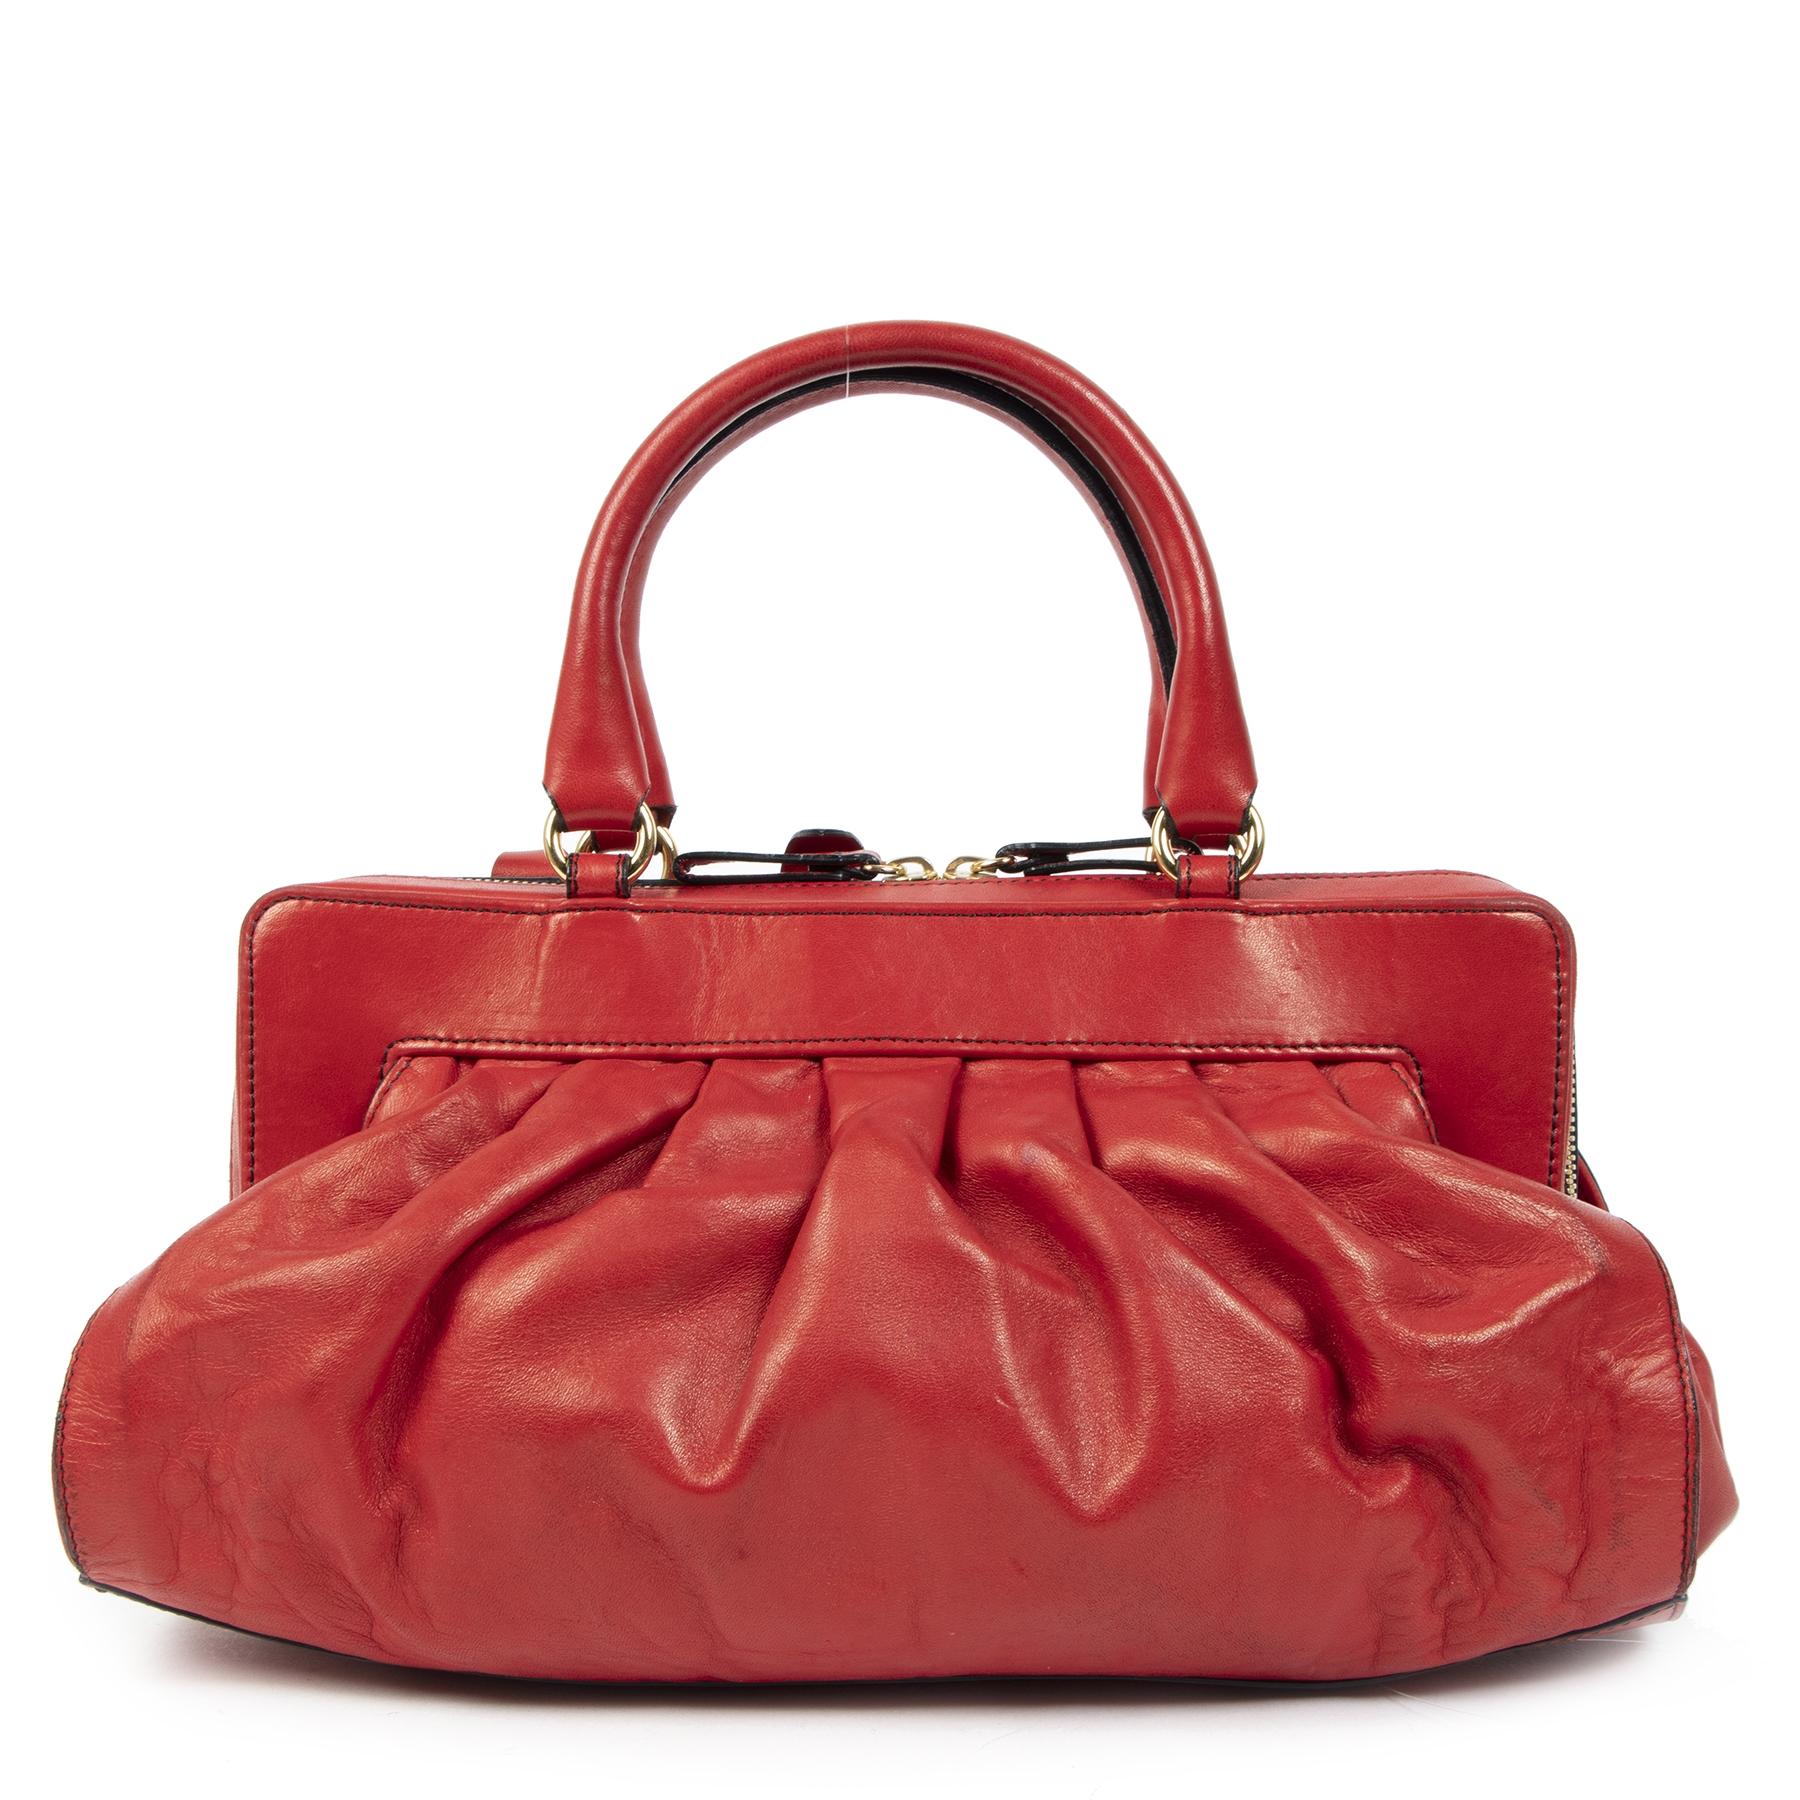 Very good condition

Valentino Garavani Red Petale RoseTop Handle Bag

Give your closet a touch of red passion with this Valentino Garavani bag. The top handle bag is crafted in red leather and features pleated leather details and elegant roses on